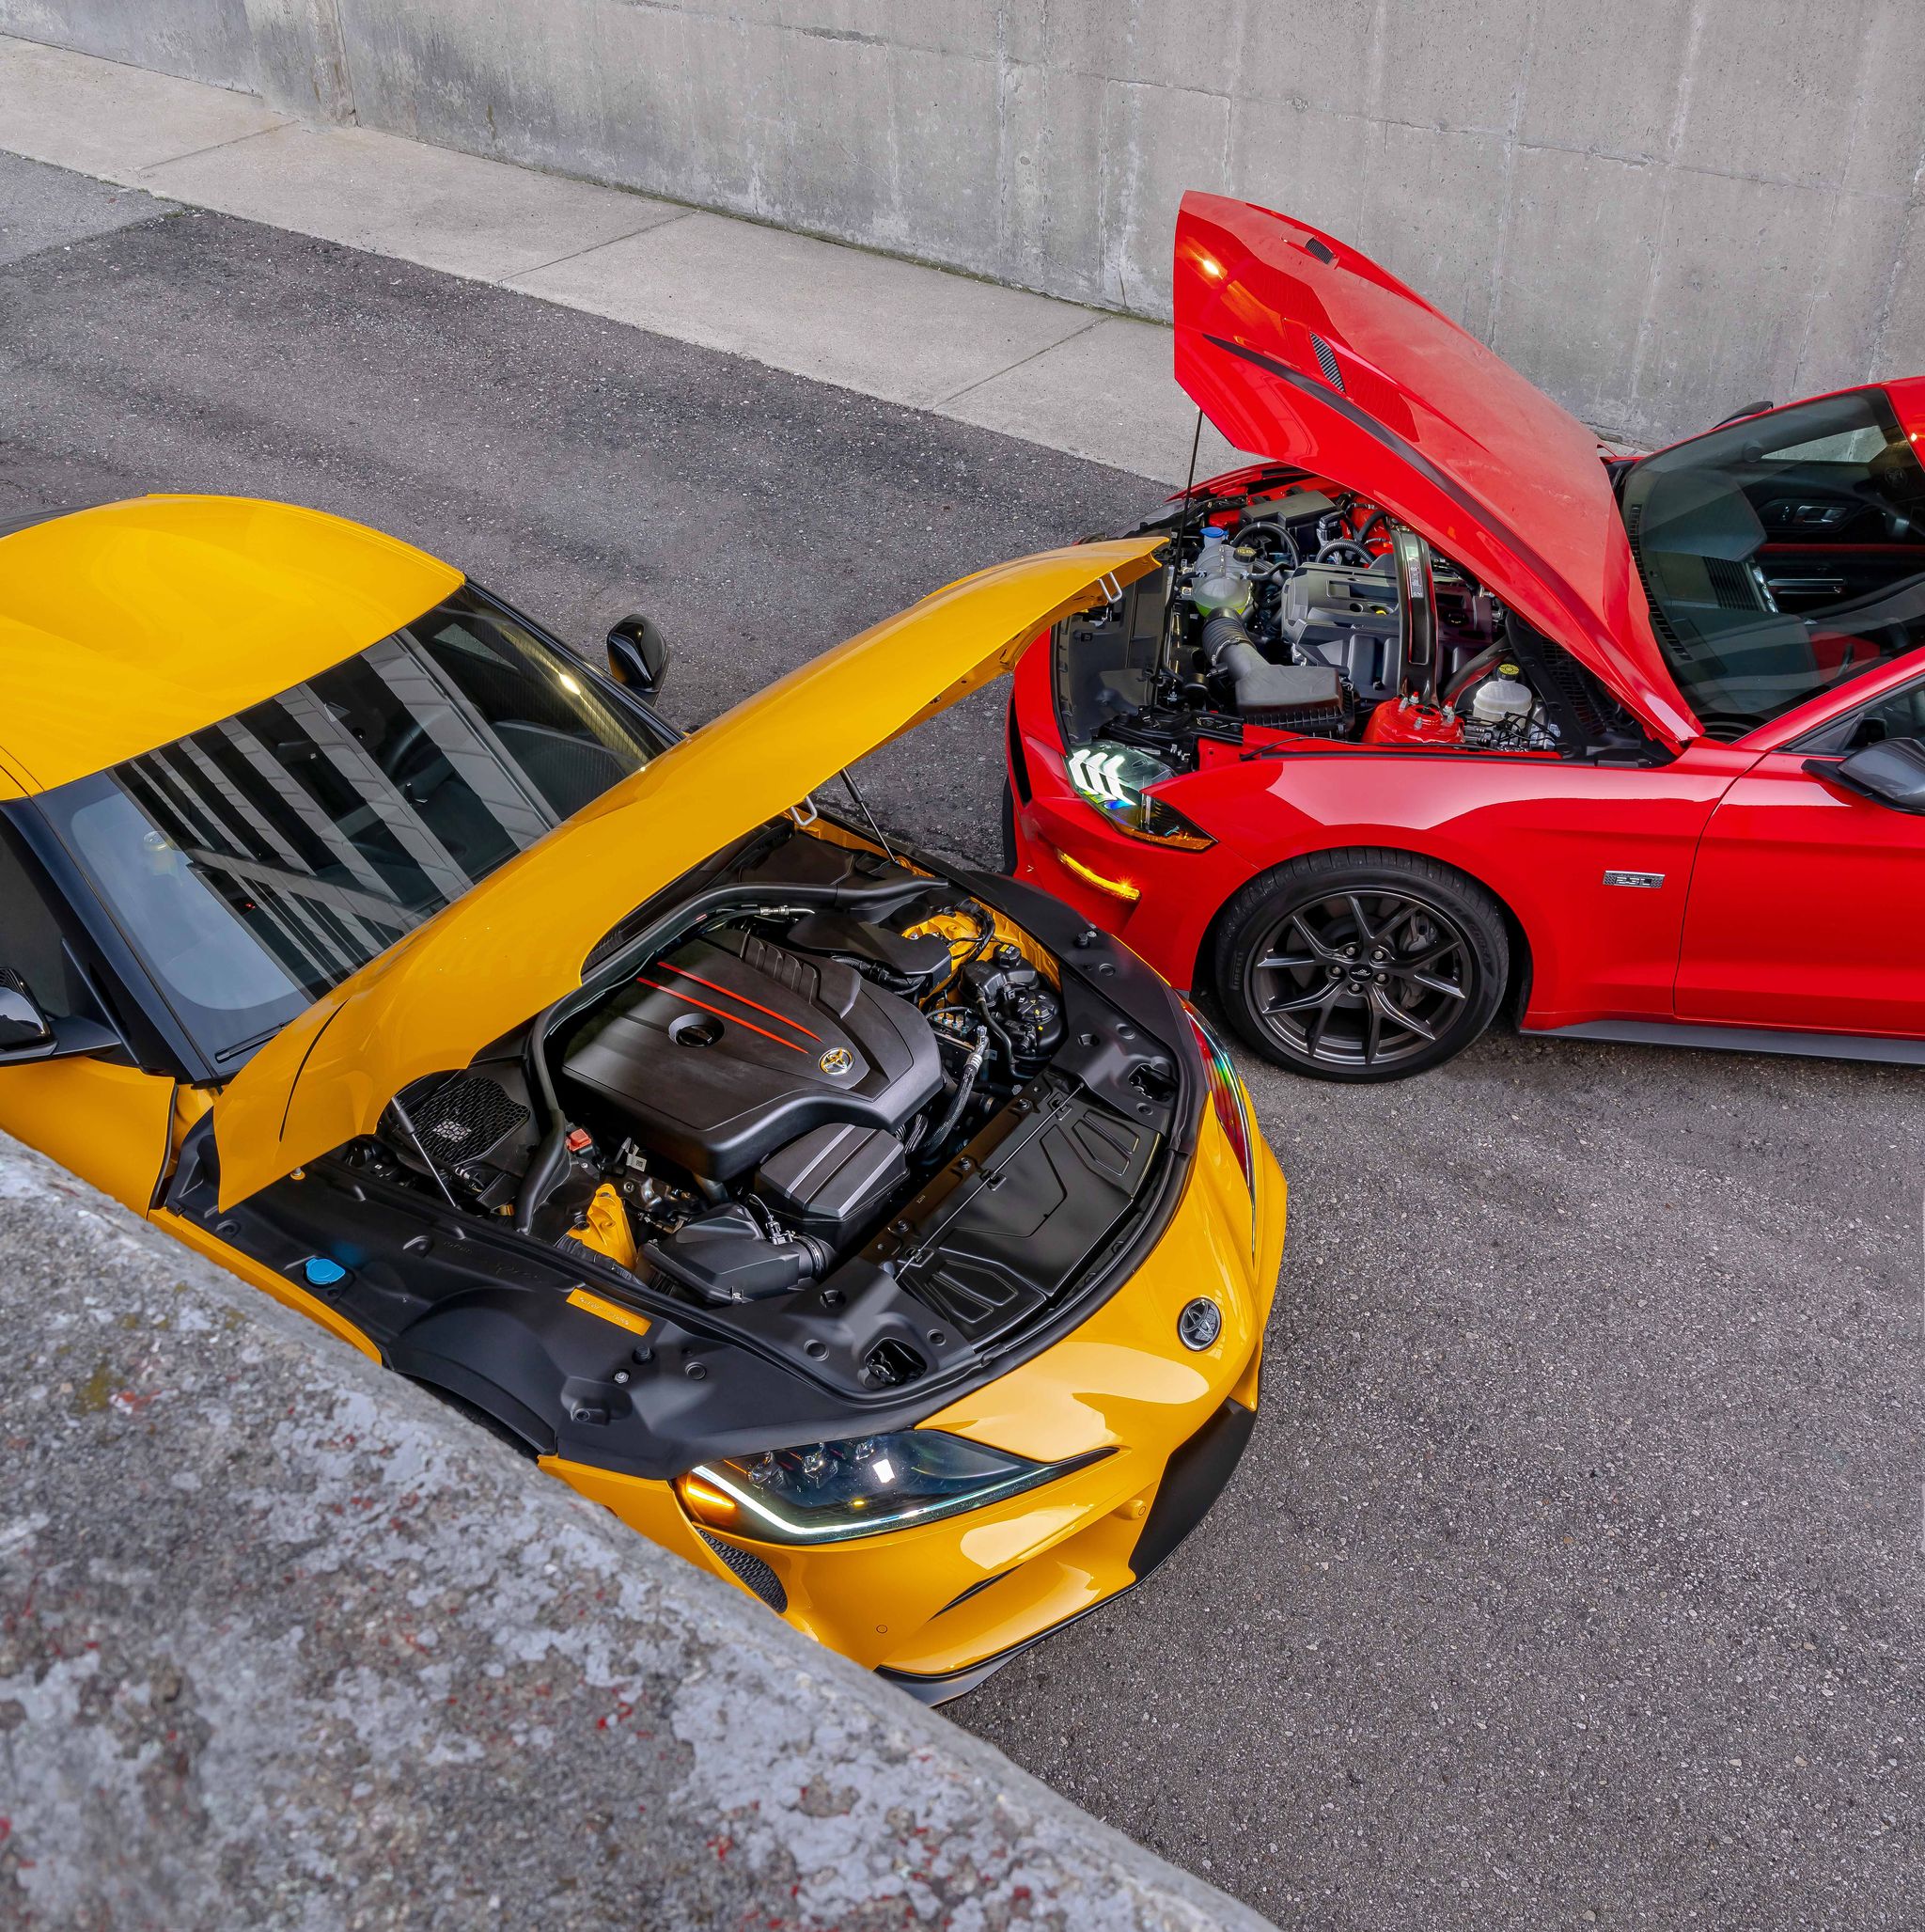 2020 ford mustang 23l high performance and 2021 toyota supra 20